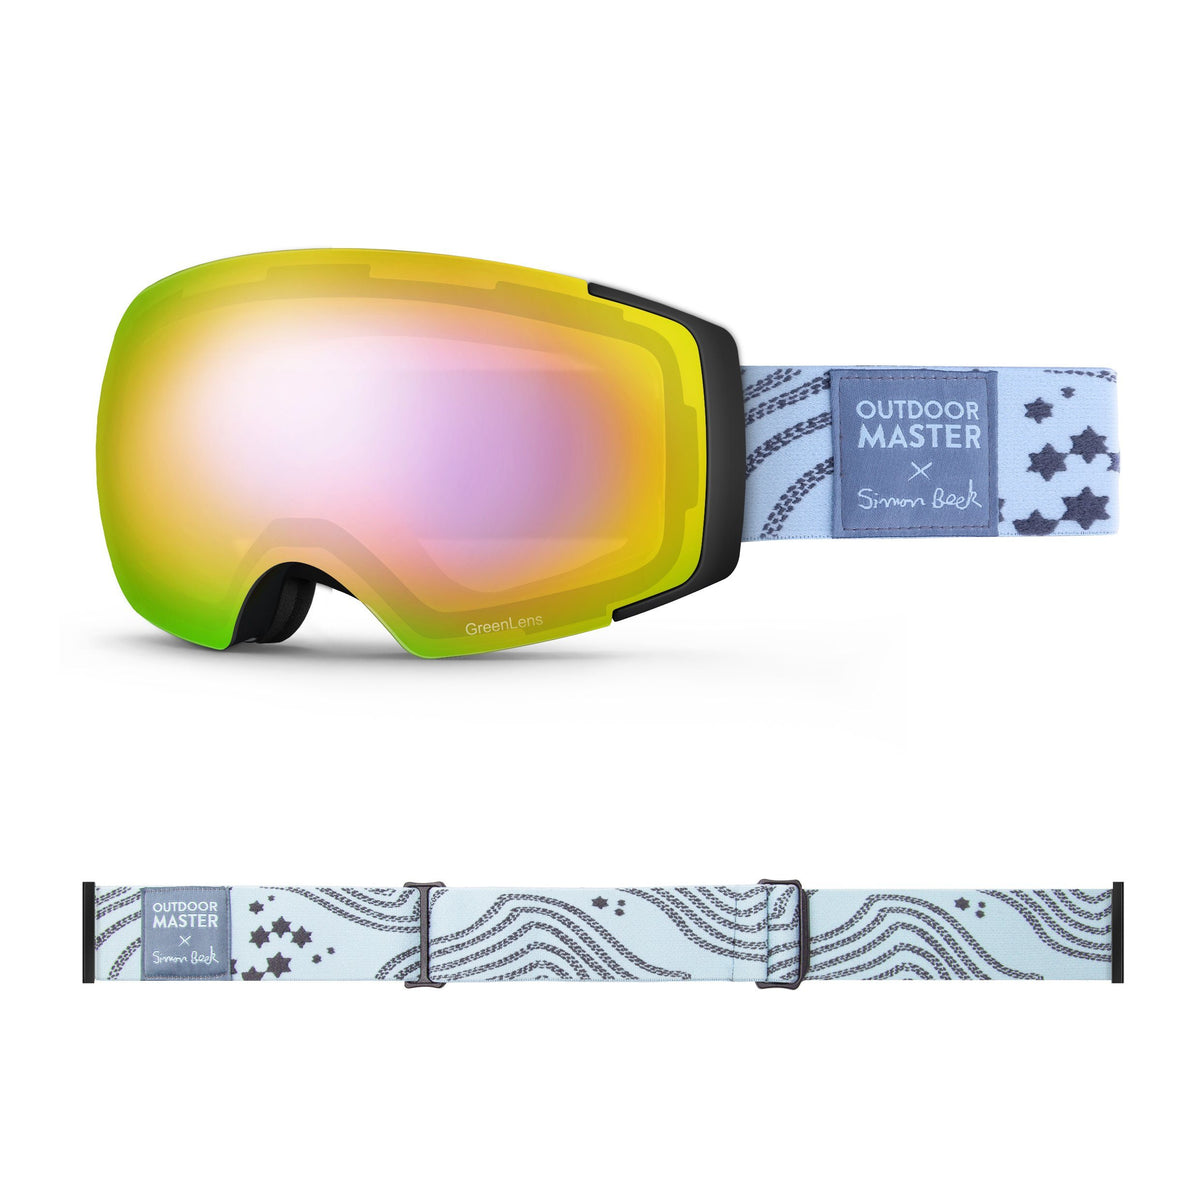 OutdoorMaster x Simon Beck Ski Goggles Pro Series - Snowshoeing Art Limited Edition OutdoorMaster GreenLens VLT 45% TAC Purple with REVO Red Polarized Star Road-Lightsteelblue